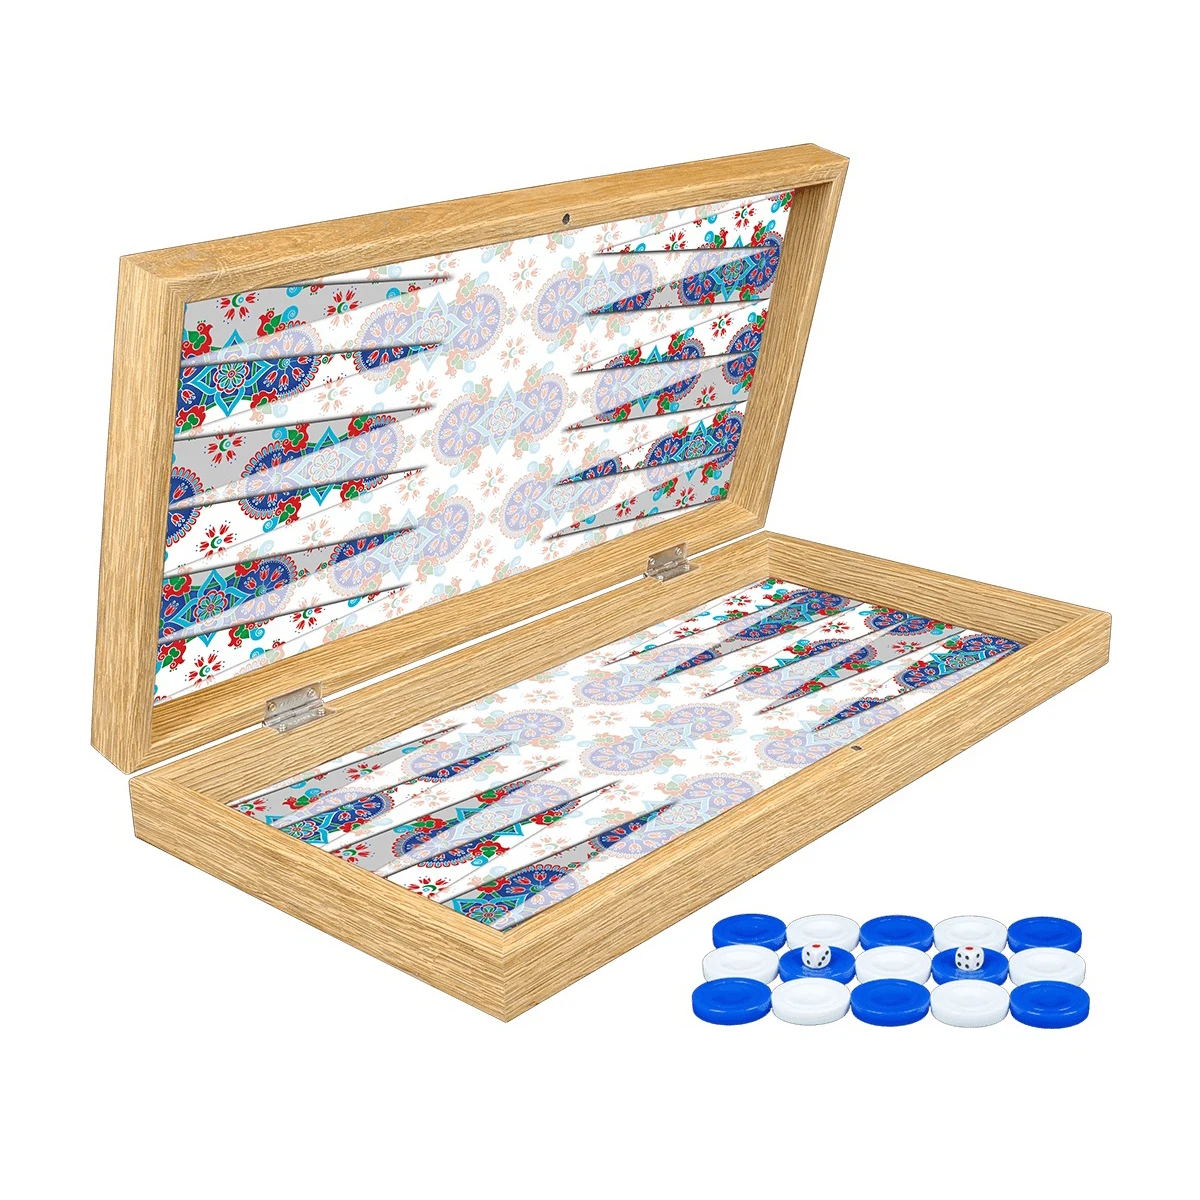 Tile Patterned Luxury Backgammon Game Set Wooden Big Size Board With Chips Checkers Dices Pieces For Gift Deck Box enlarge